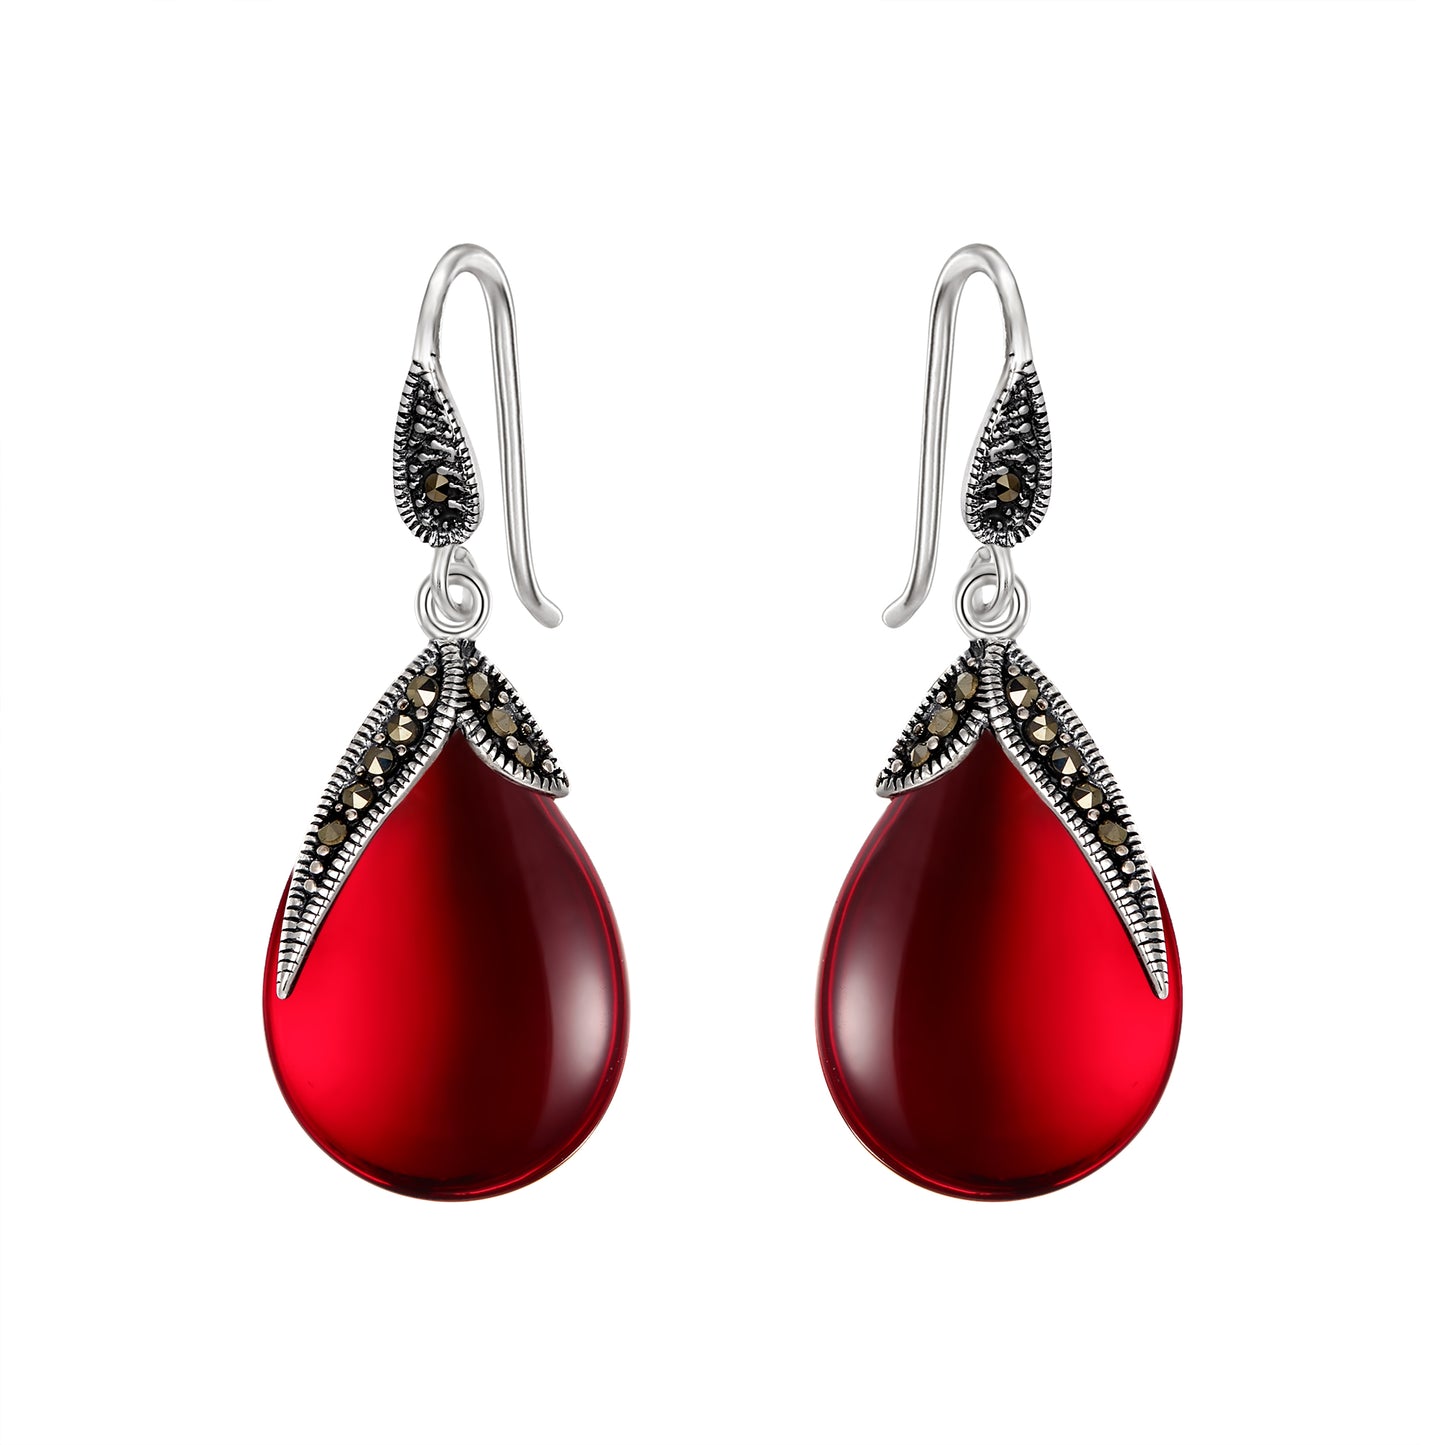 12825 EVER FAITH Teardrop Dangle Earrings, 925 Sterling Silver Synthetic Red Corundum Retro Double Leaf Gemstone Crystal Jewelry for Women